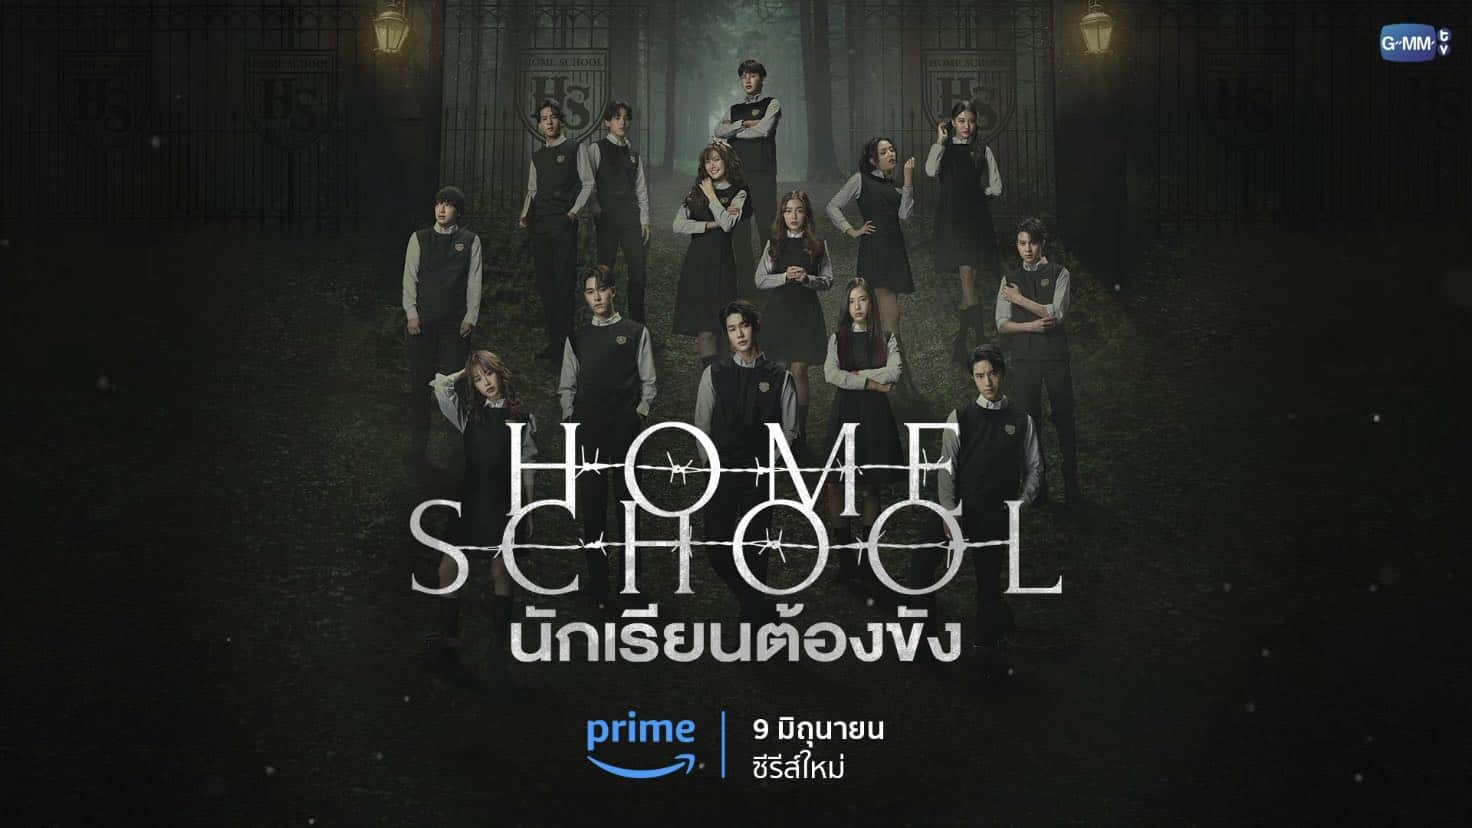 Home School Episodes 5 & 6: Releasing Date, Preview & Streaming Guide